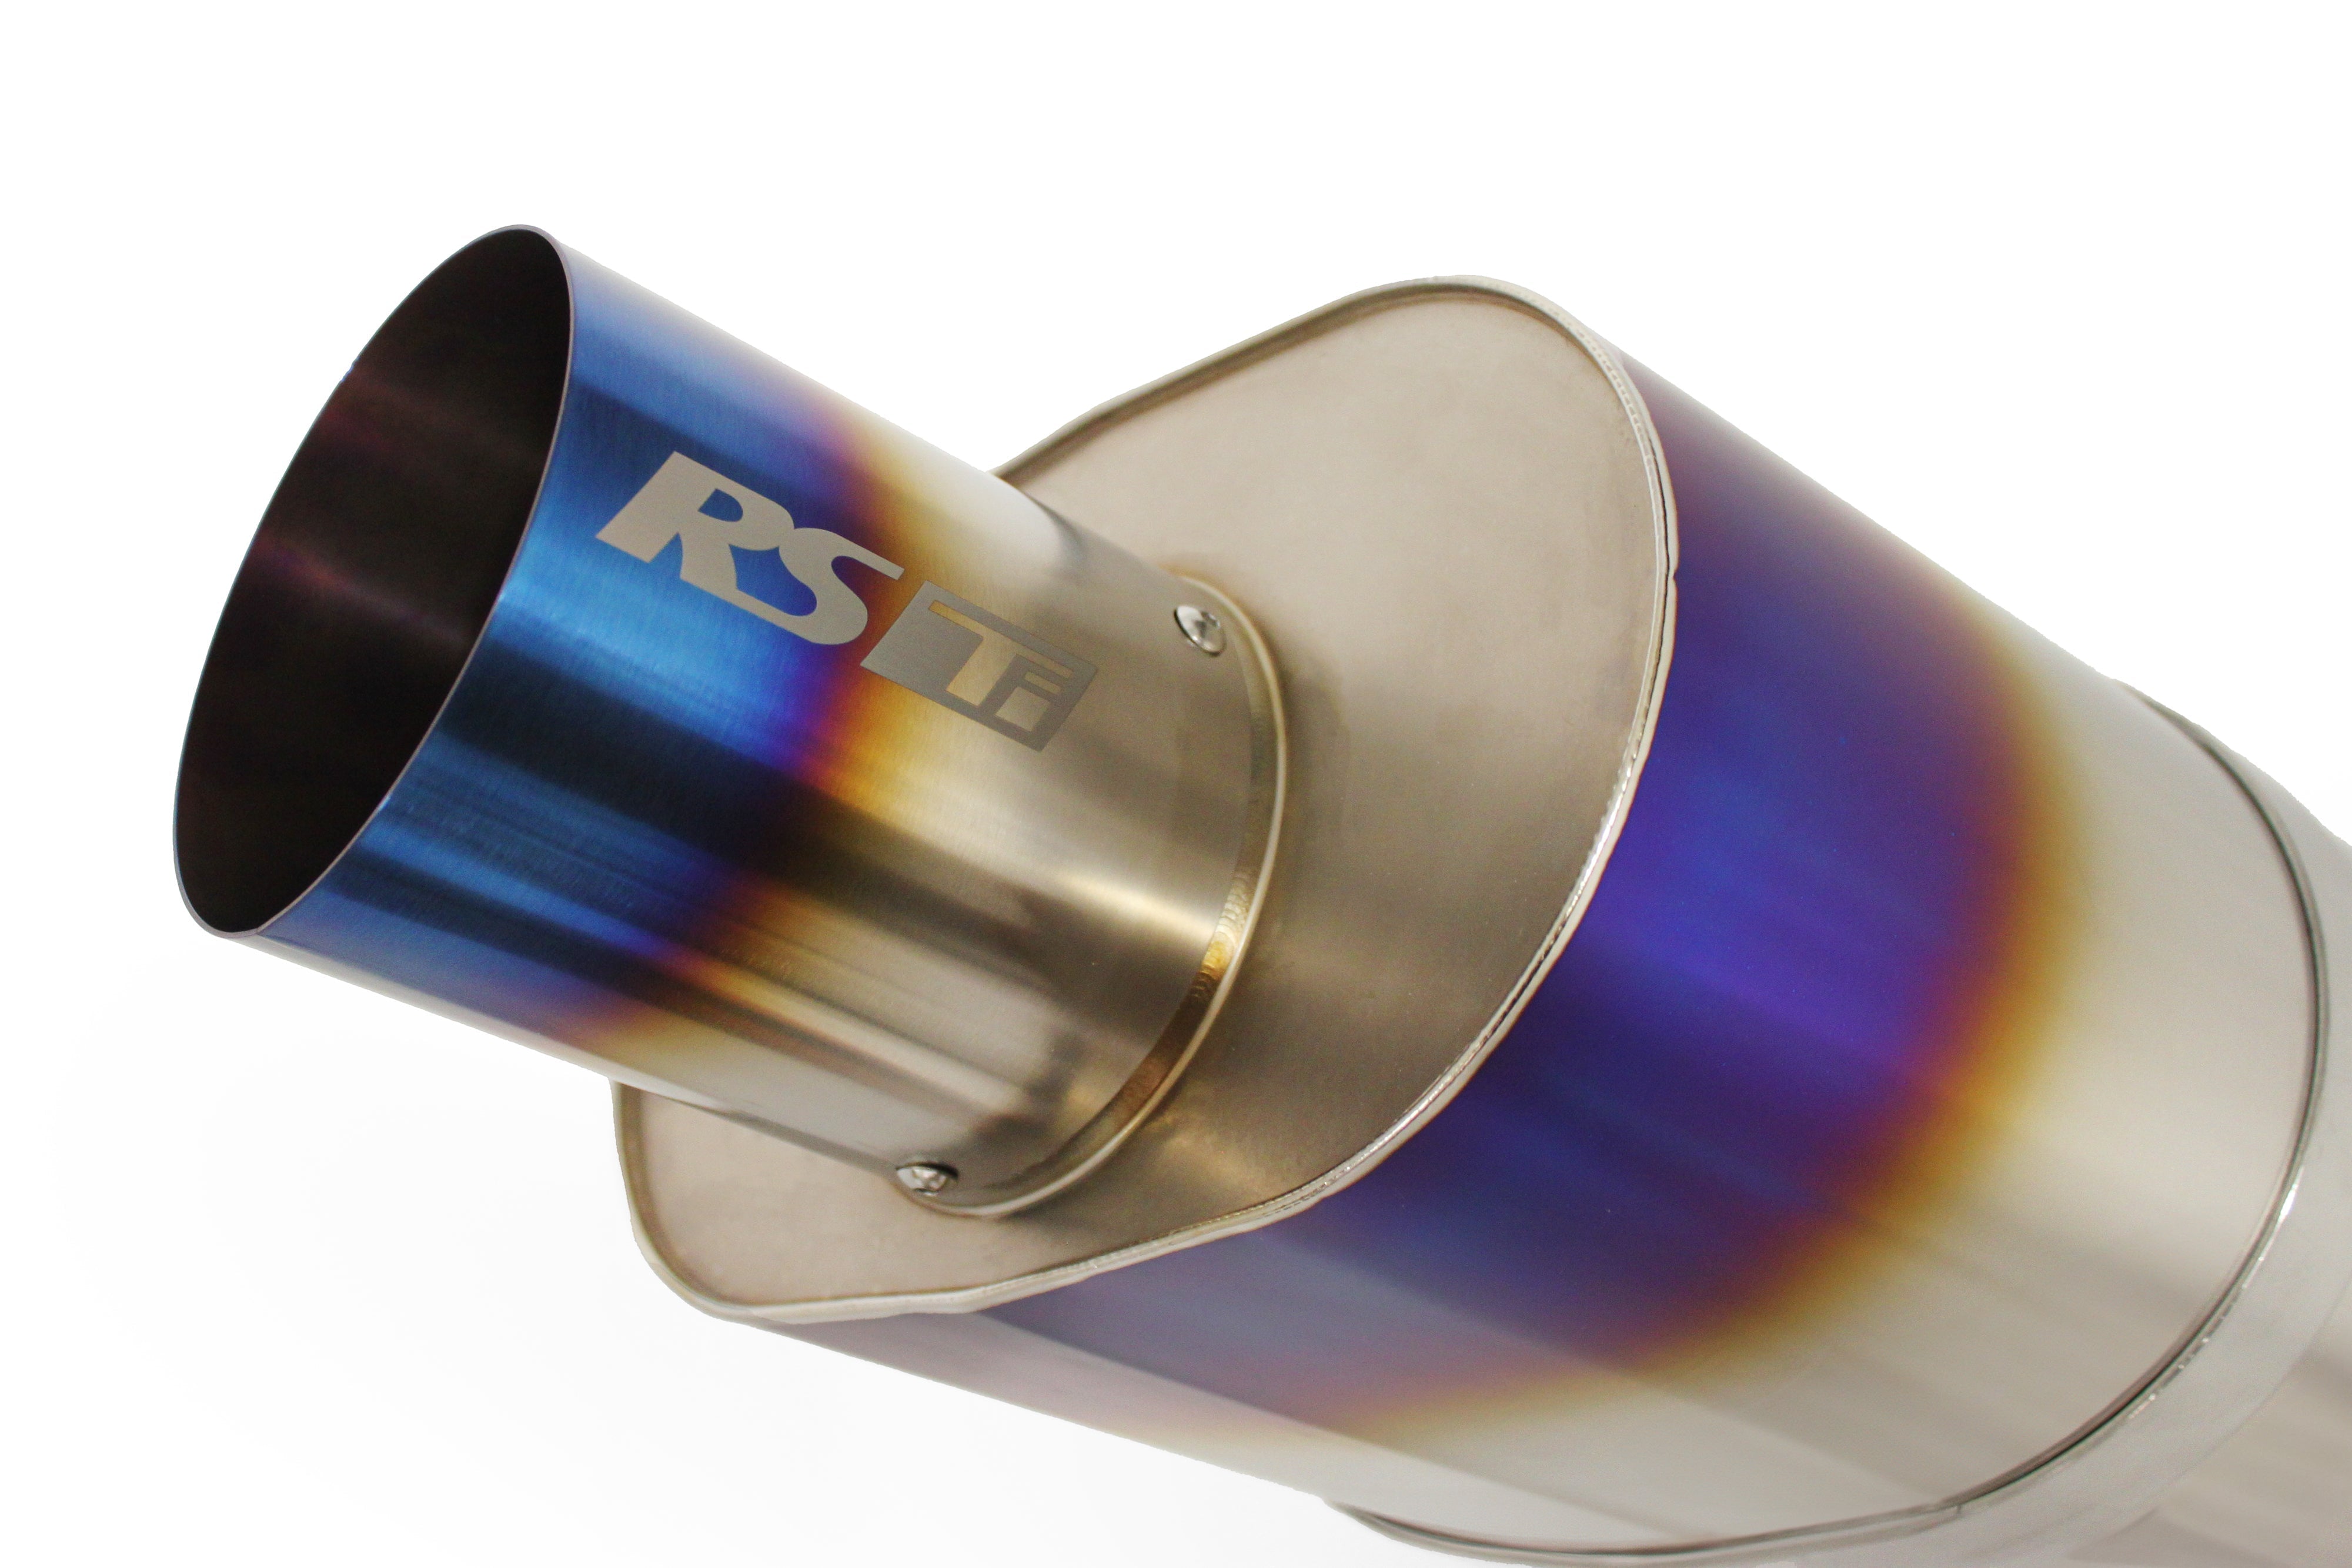 Universal RS-Ti Oval Titanium Muffler(s) and Tip with V-Band